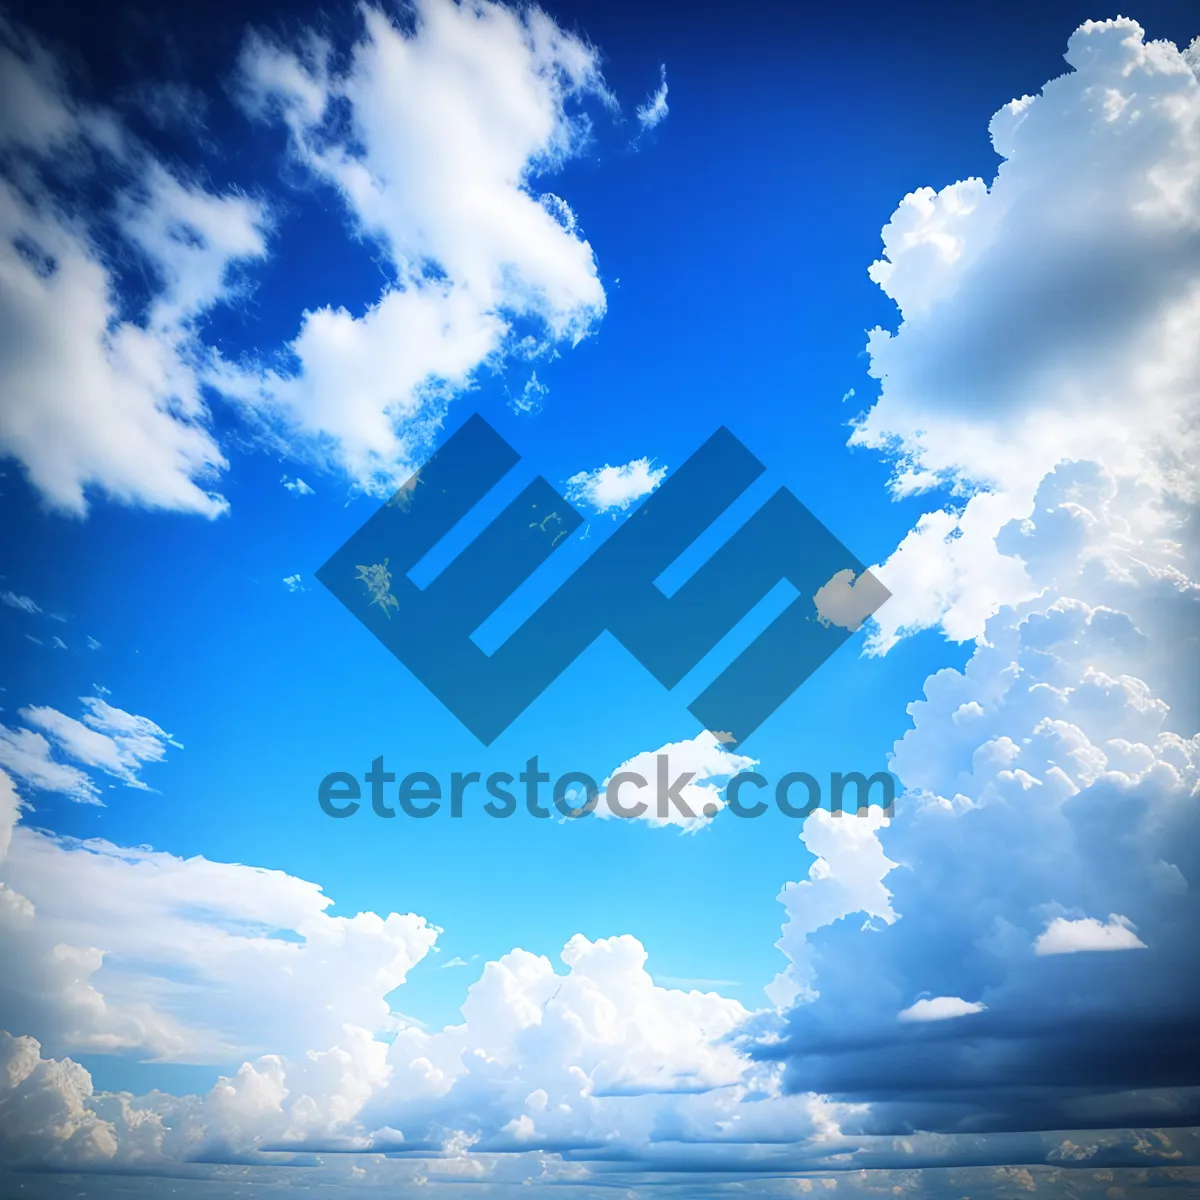 Picture of Heavenly Skies: Majestic Cumulus Clouds Embracing Colorful Landscape